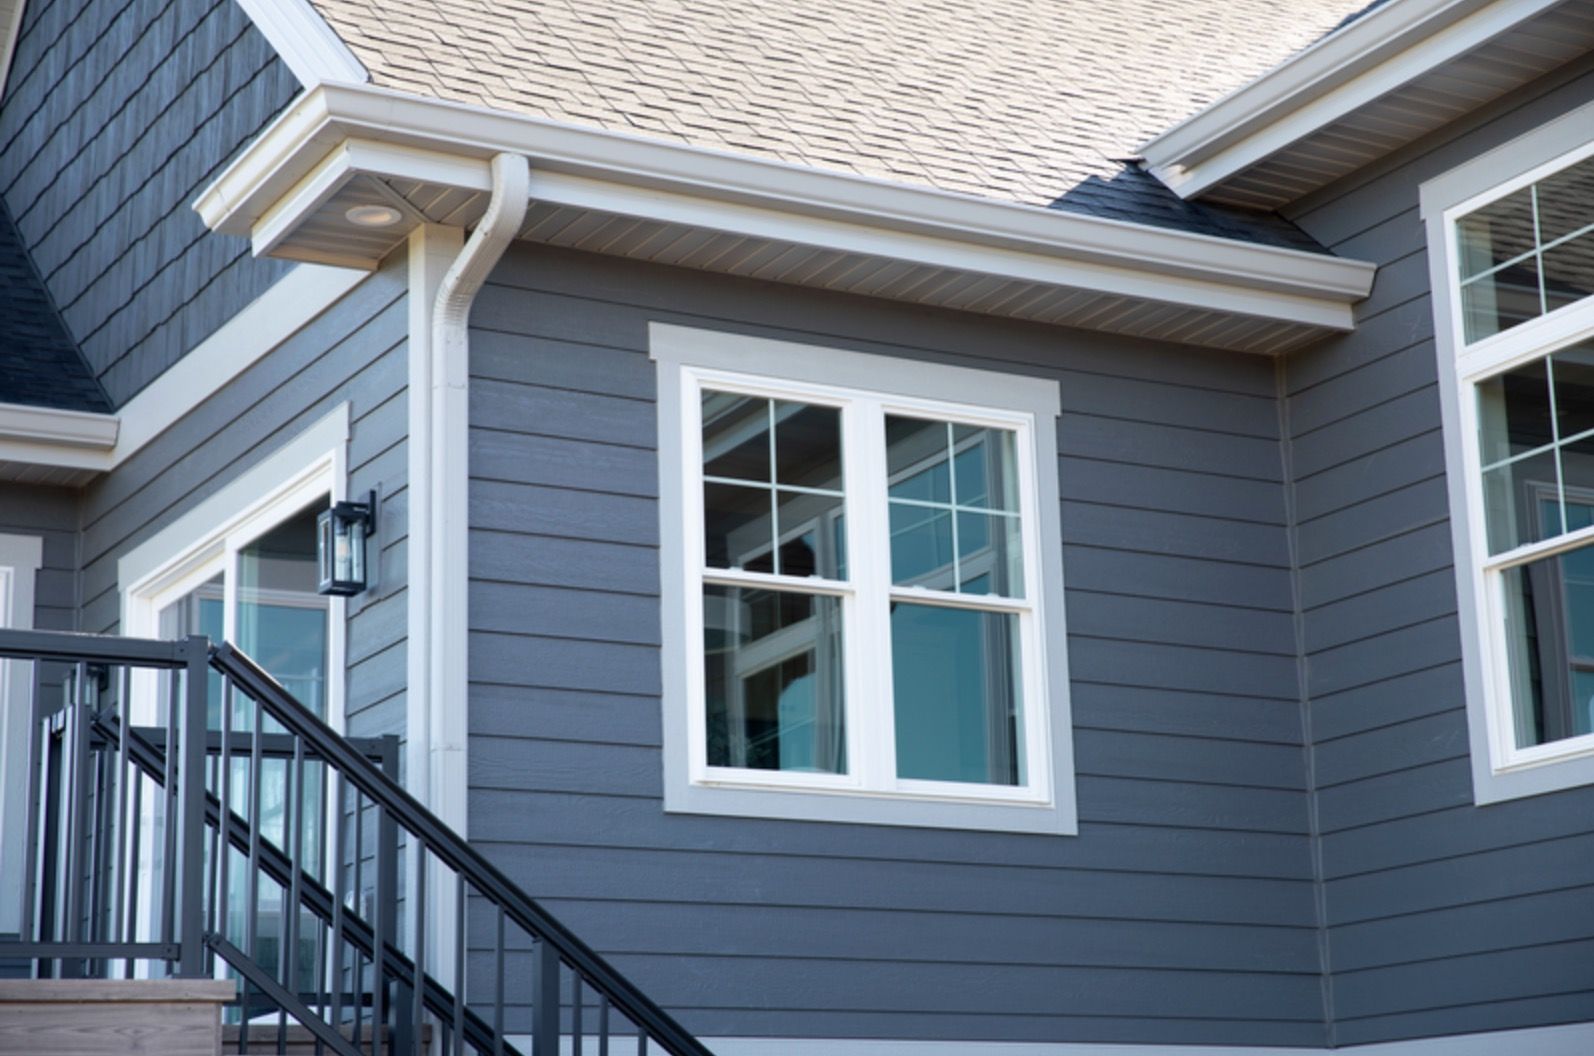 LP Siding in blue panel with white trim.